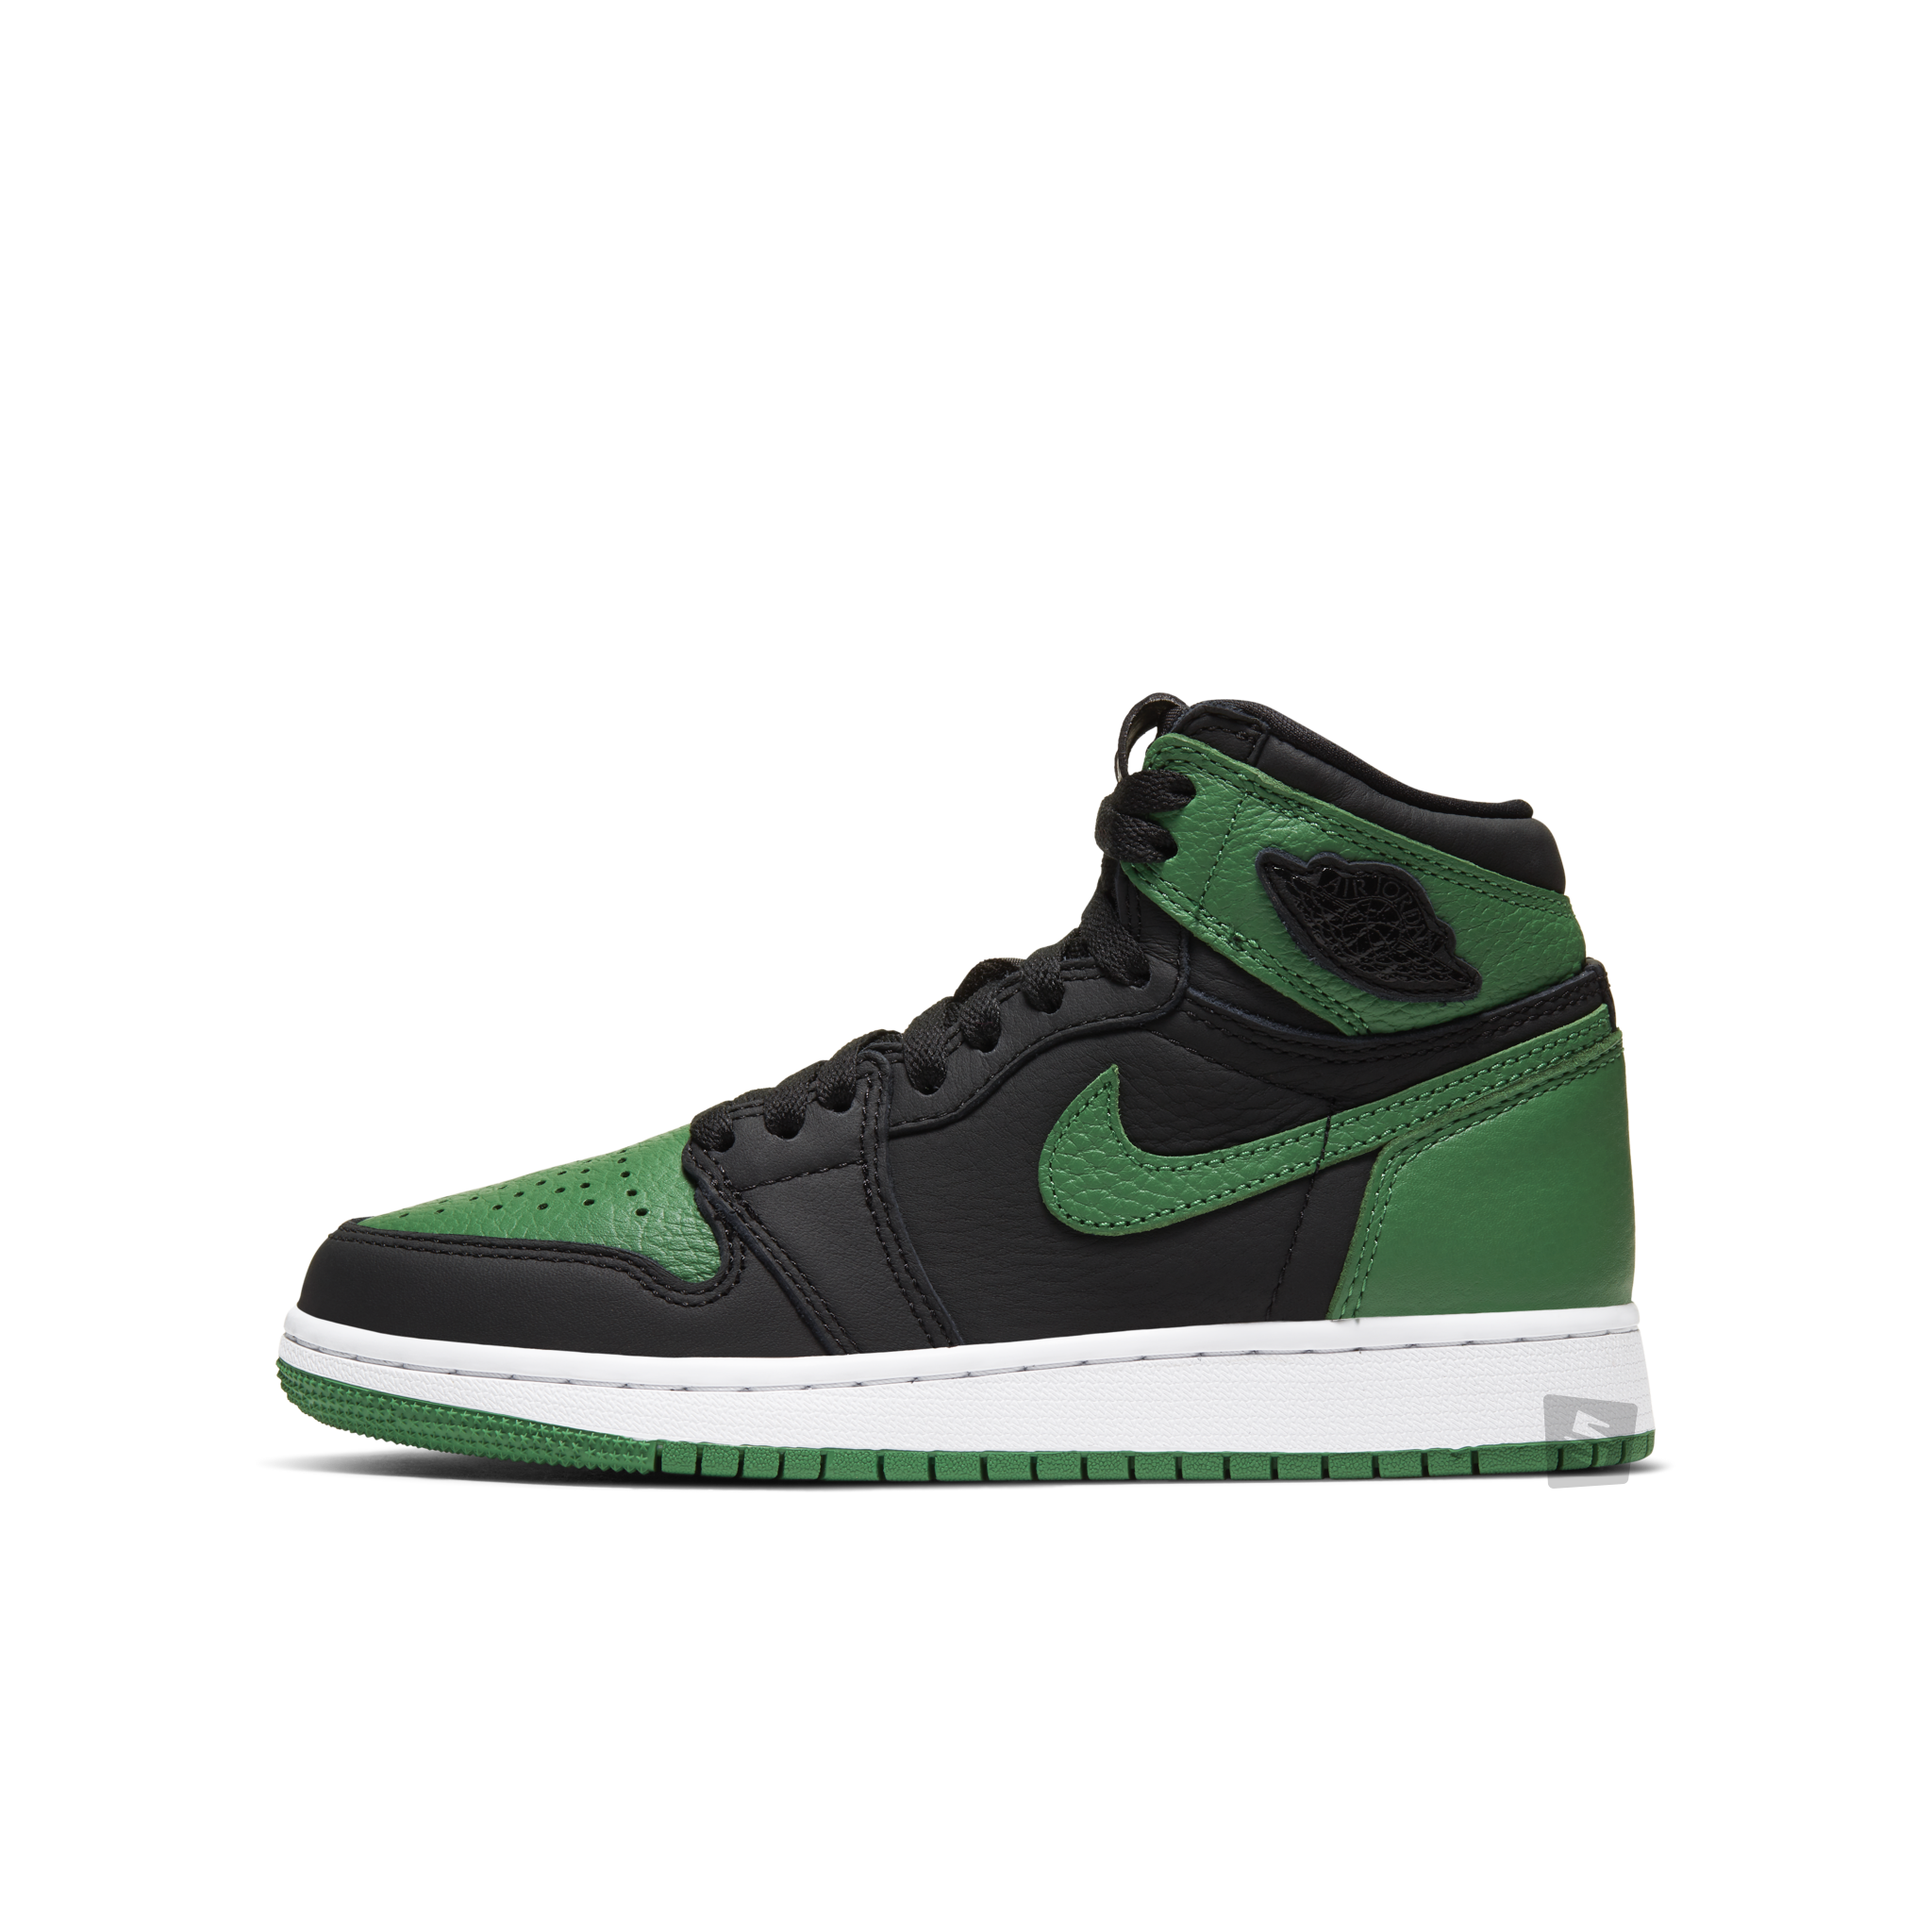 the green and black jordans